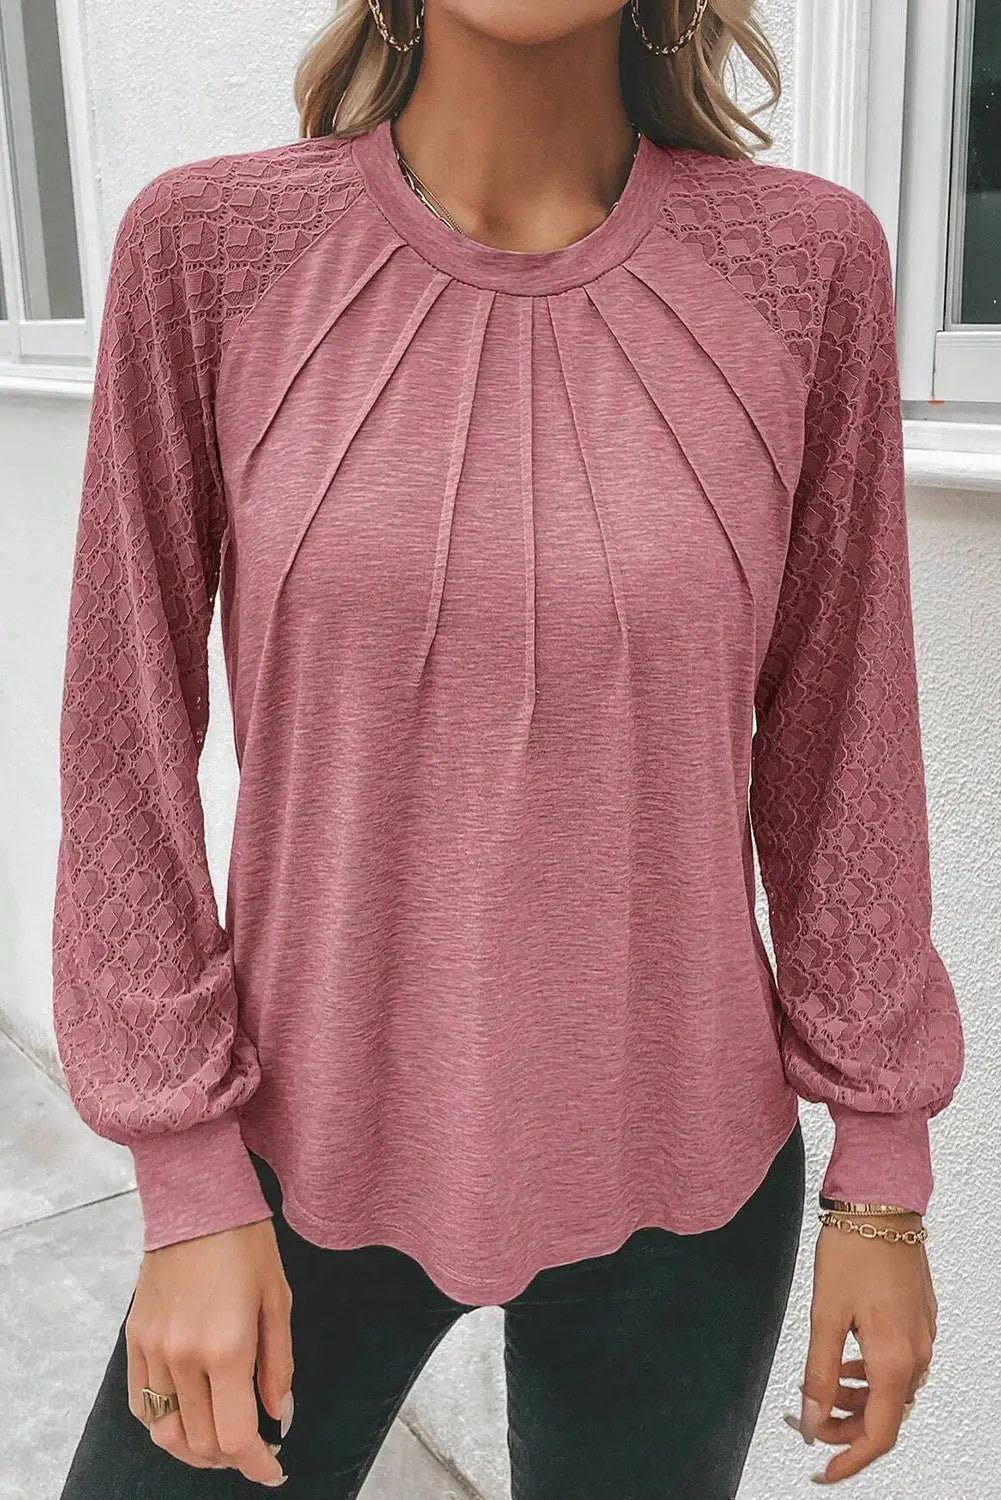 Rose pink contrast lace raglan sleeve plicate round neck top - long tops